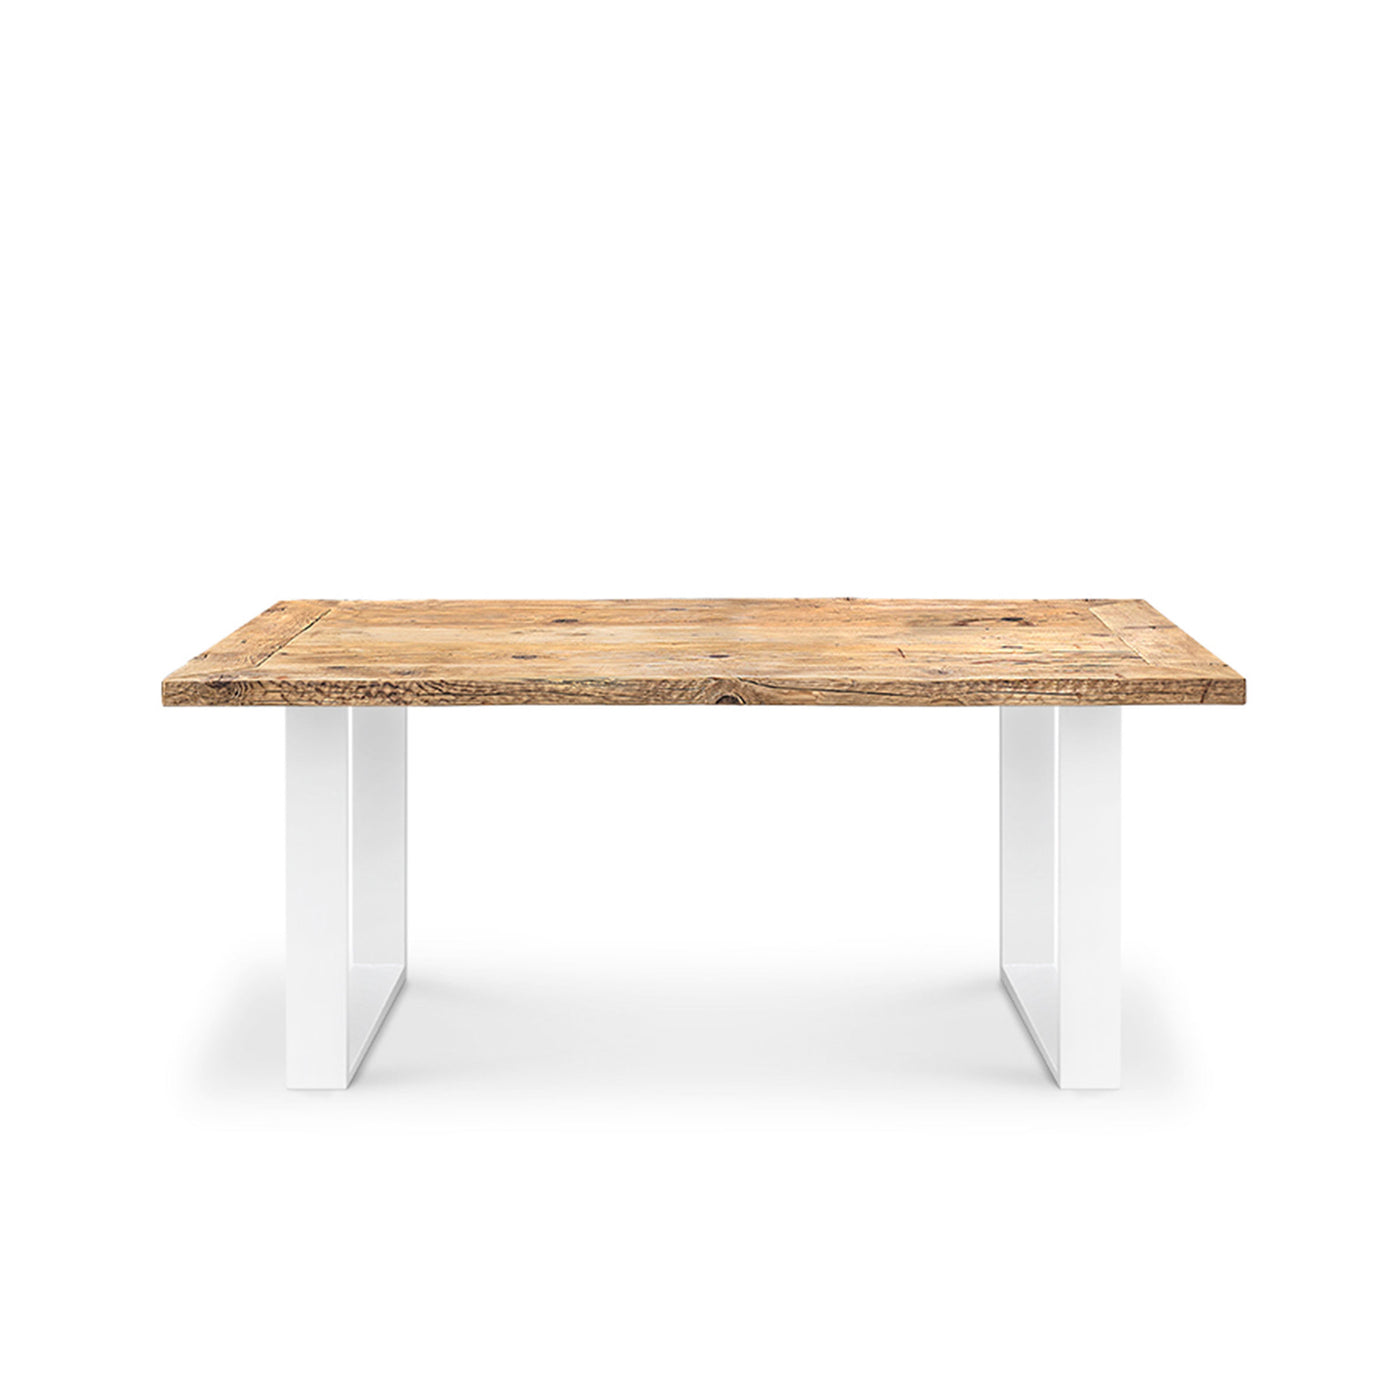 Wood Dining Table MAXIMO Six Seater by Giuseppe Mazzardi for Inventoom 05